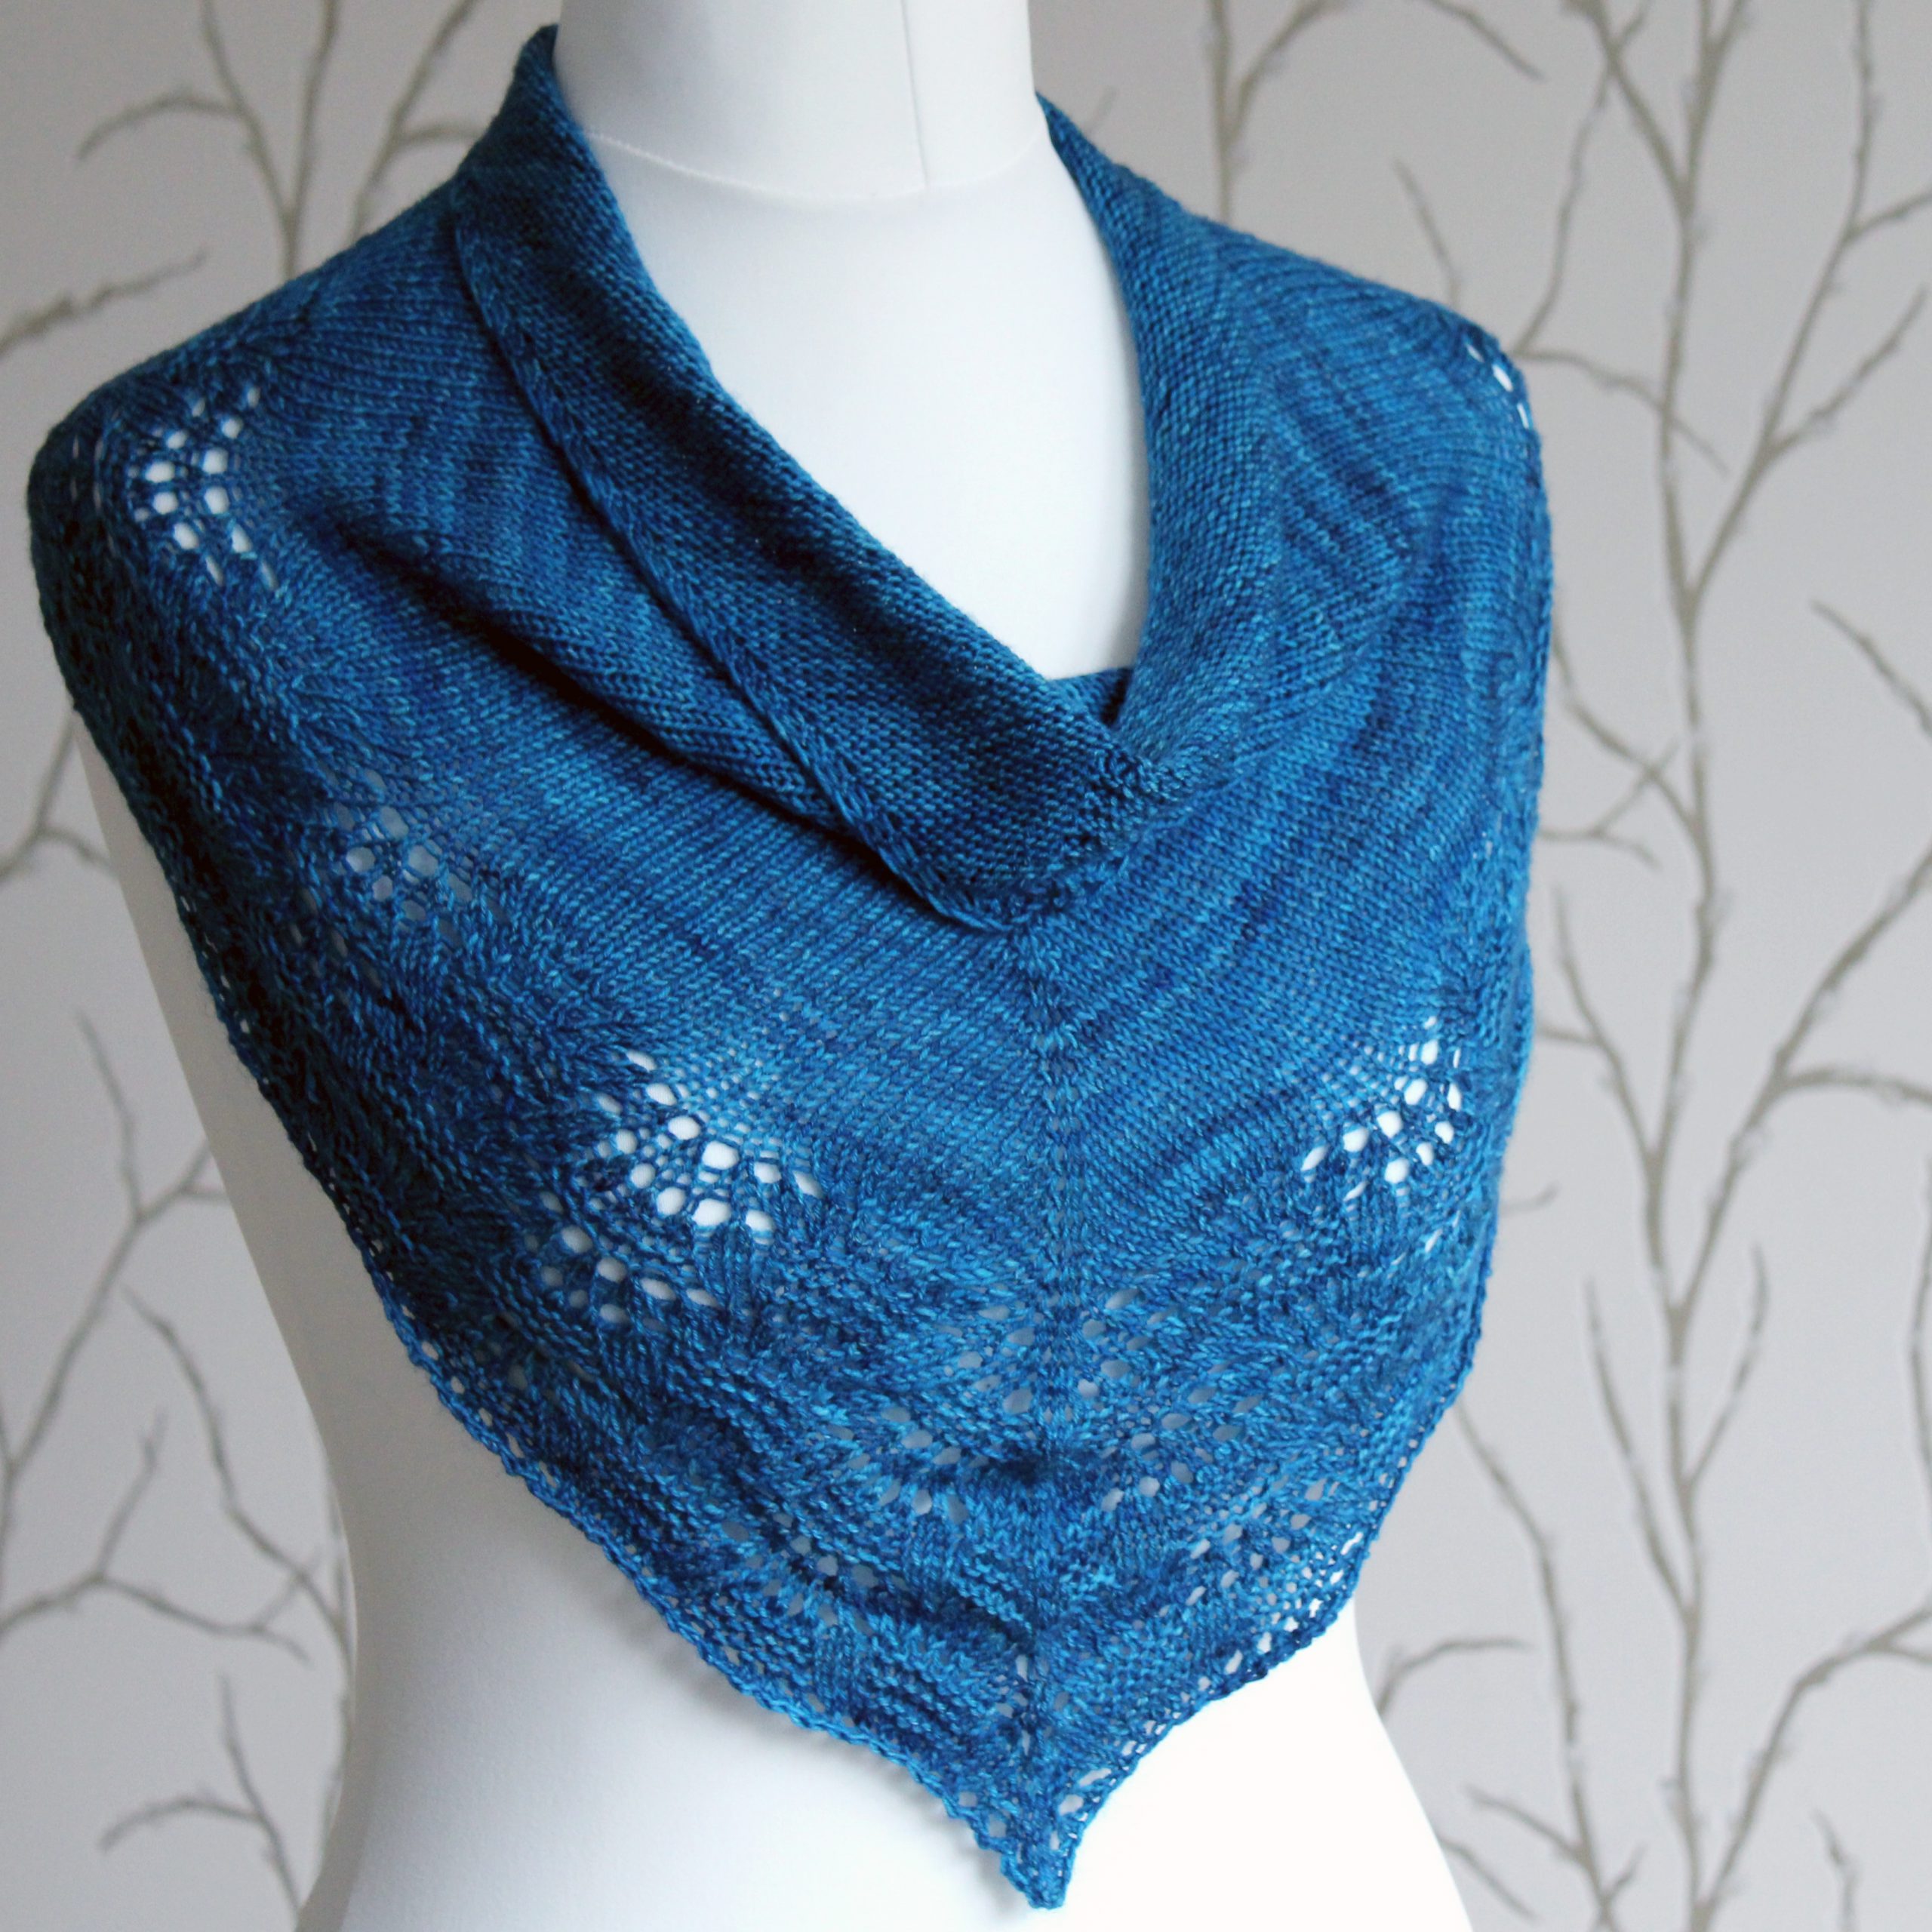 A blue triangular cowlette with a stocking stitch body and rippling lace and textured border